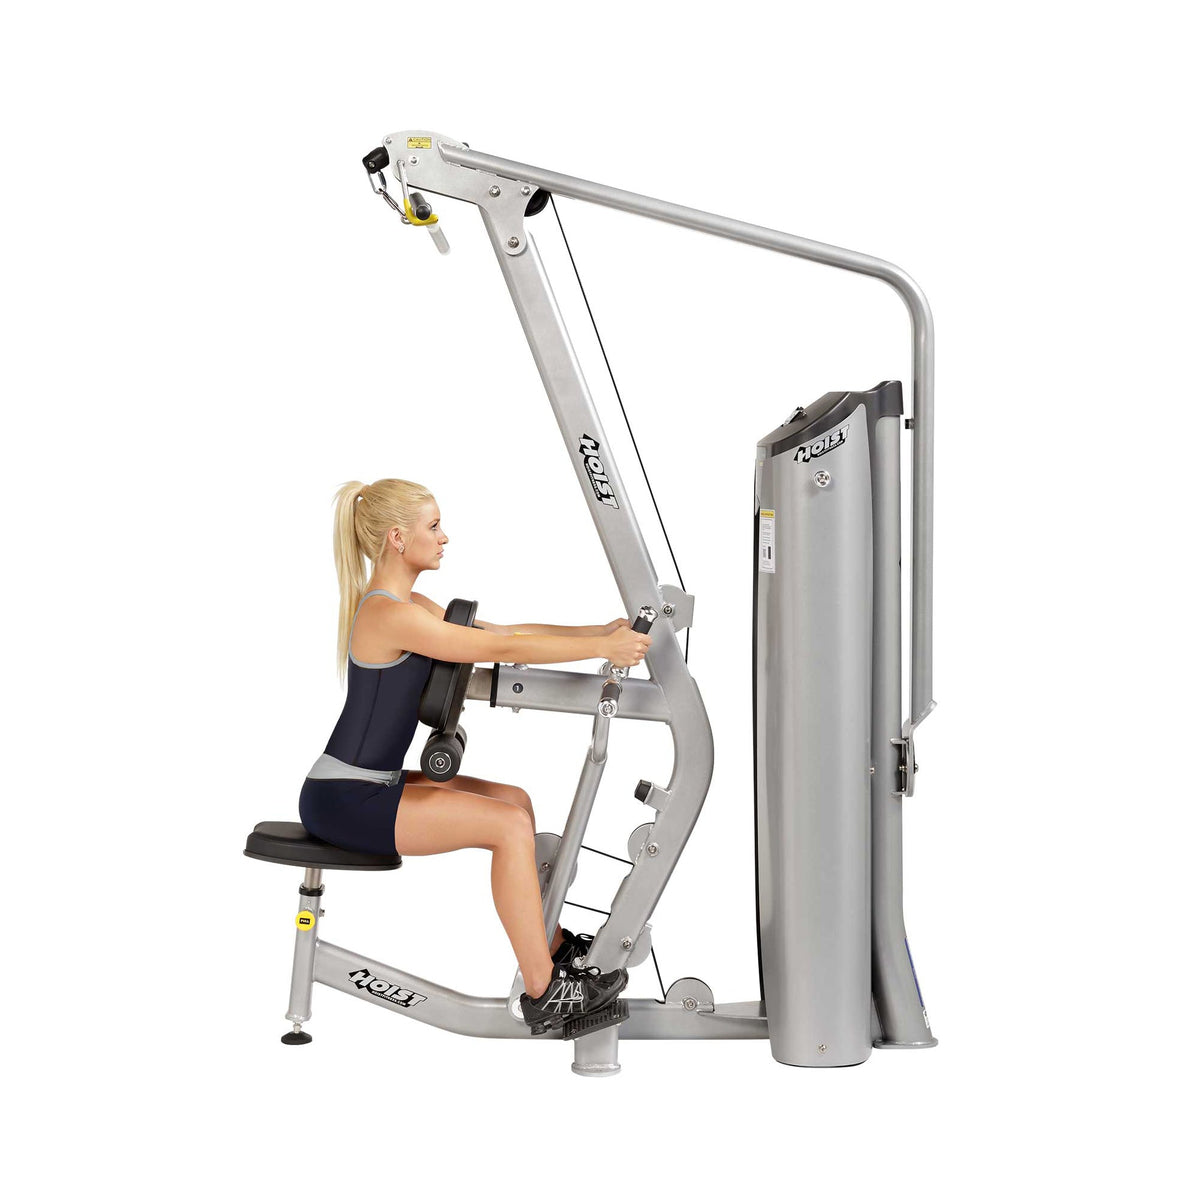 Hoist Fitness HD-3200 Lat Pulldown/Mid Row view of mid row exercise | Fitness Experience